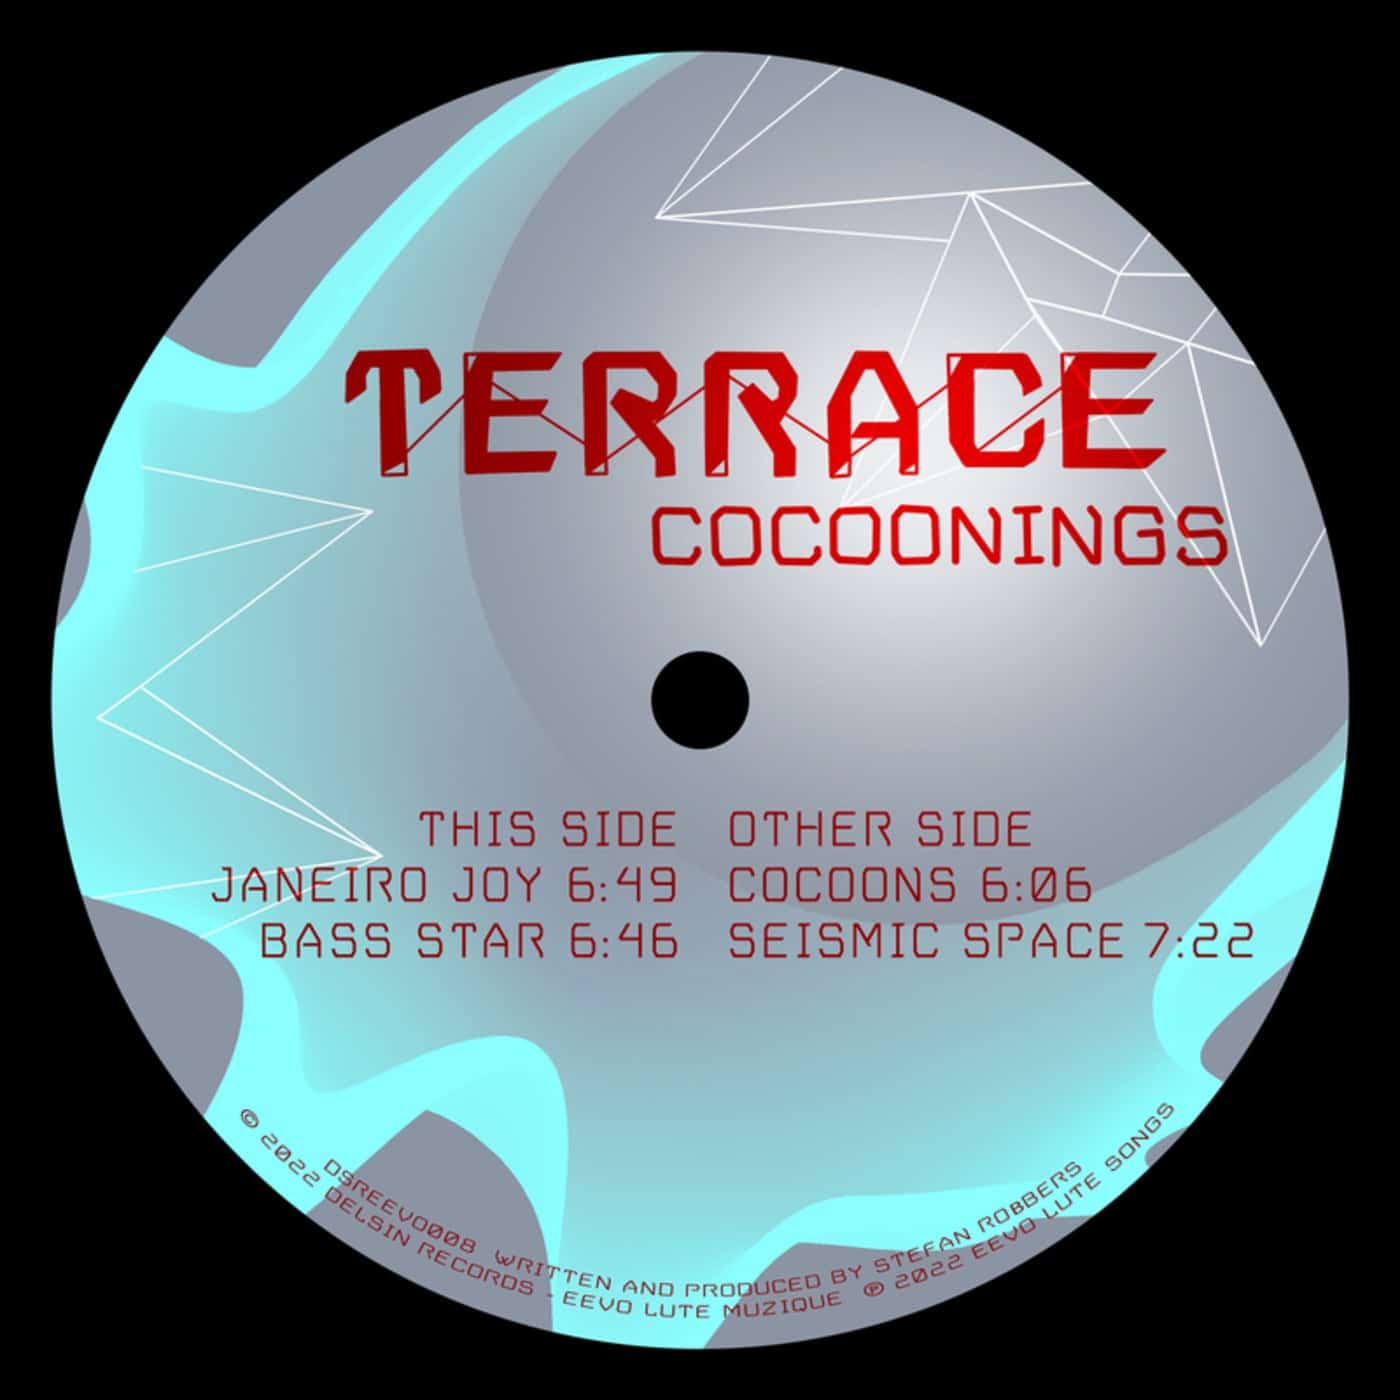 Download Terrace - Cocoonings on Electrobuzz